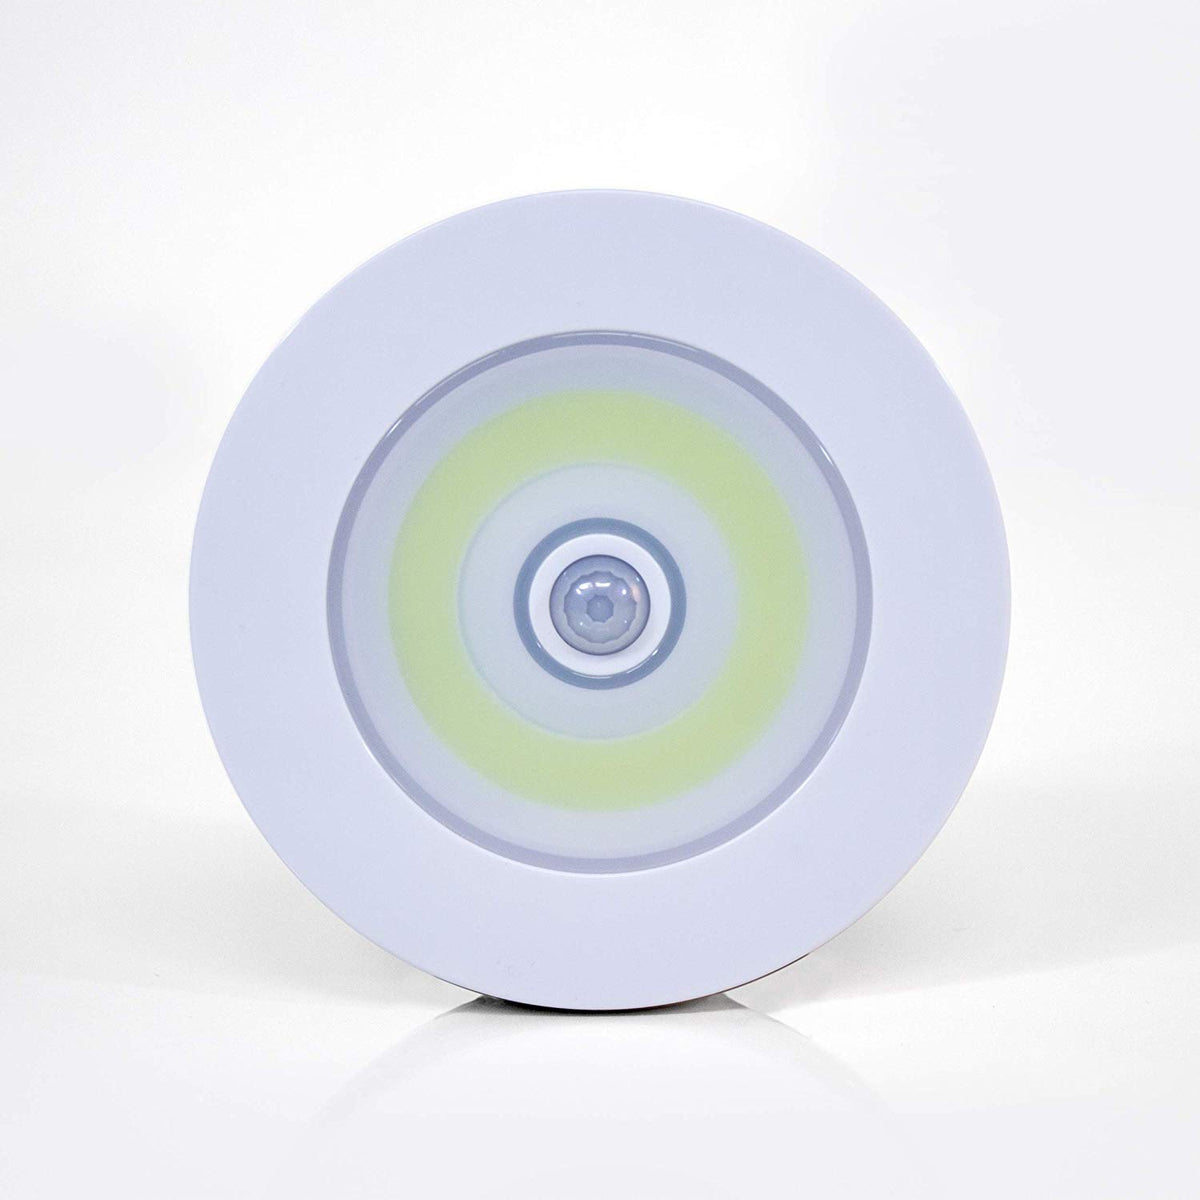 Over Lite OVL-CD6 Motion Activated Ceiling/Wall Light, As Seen On TV